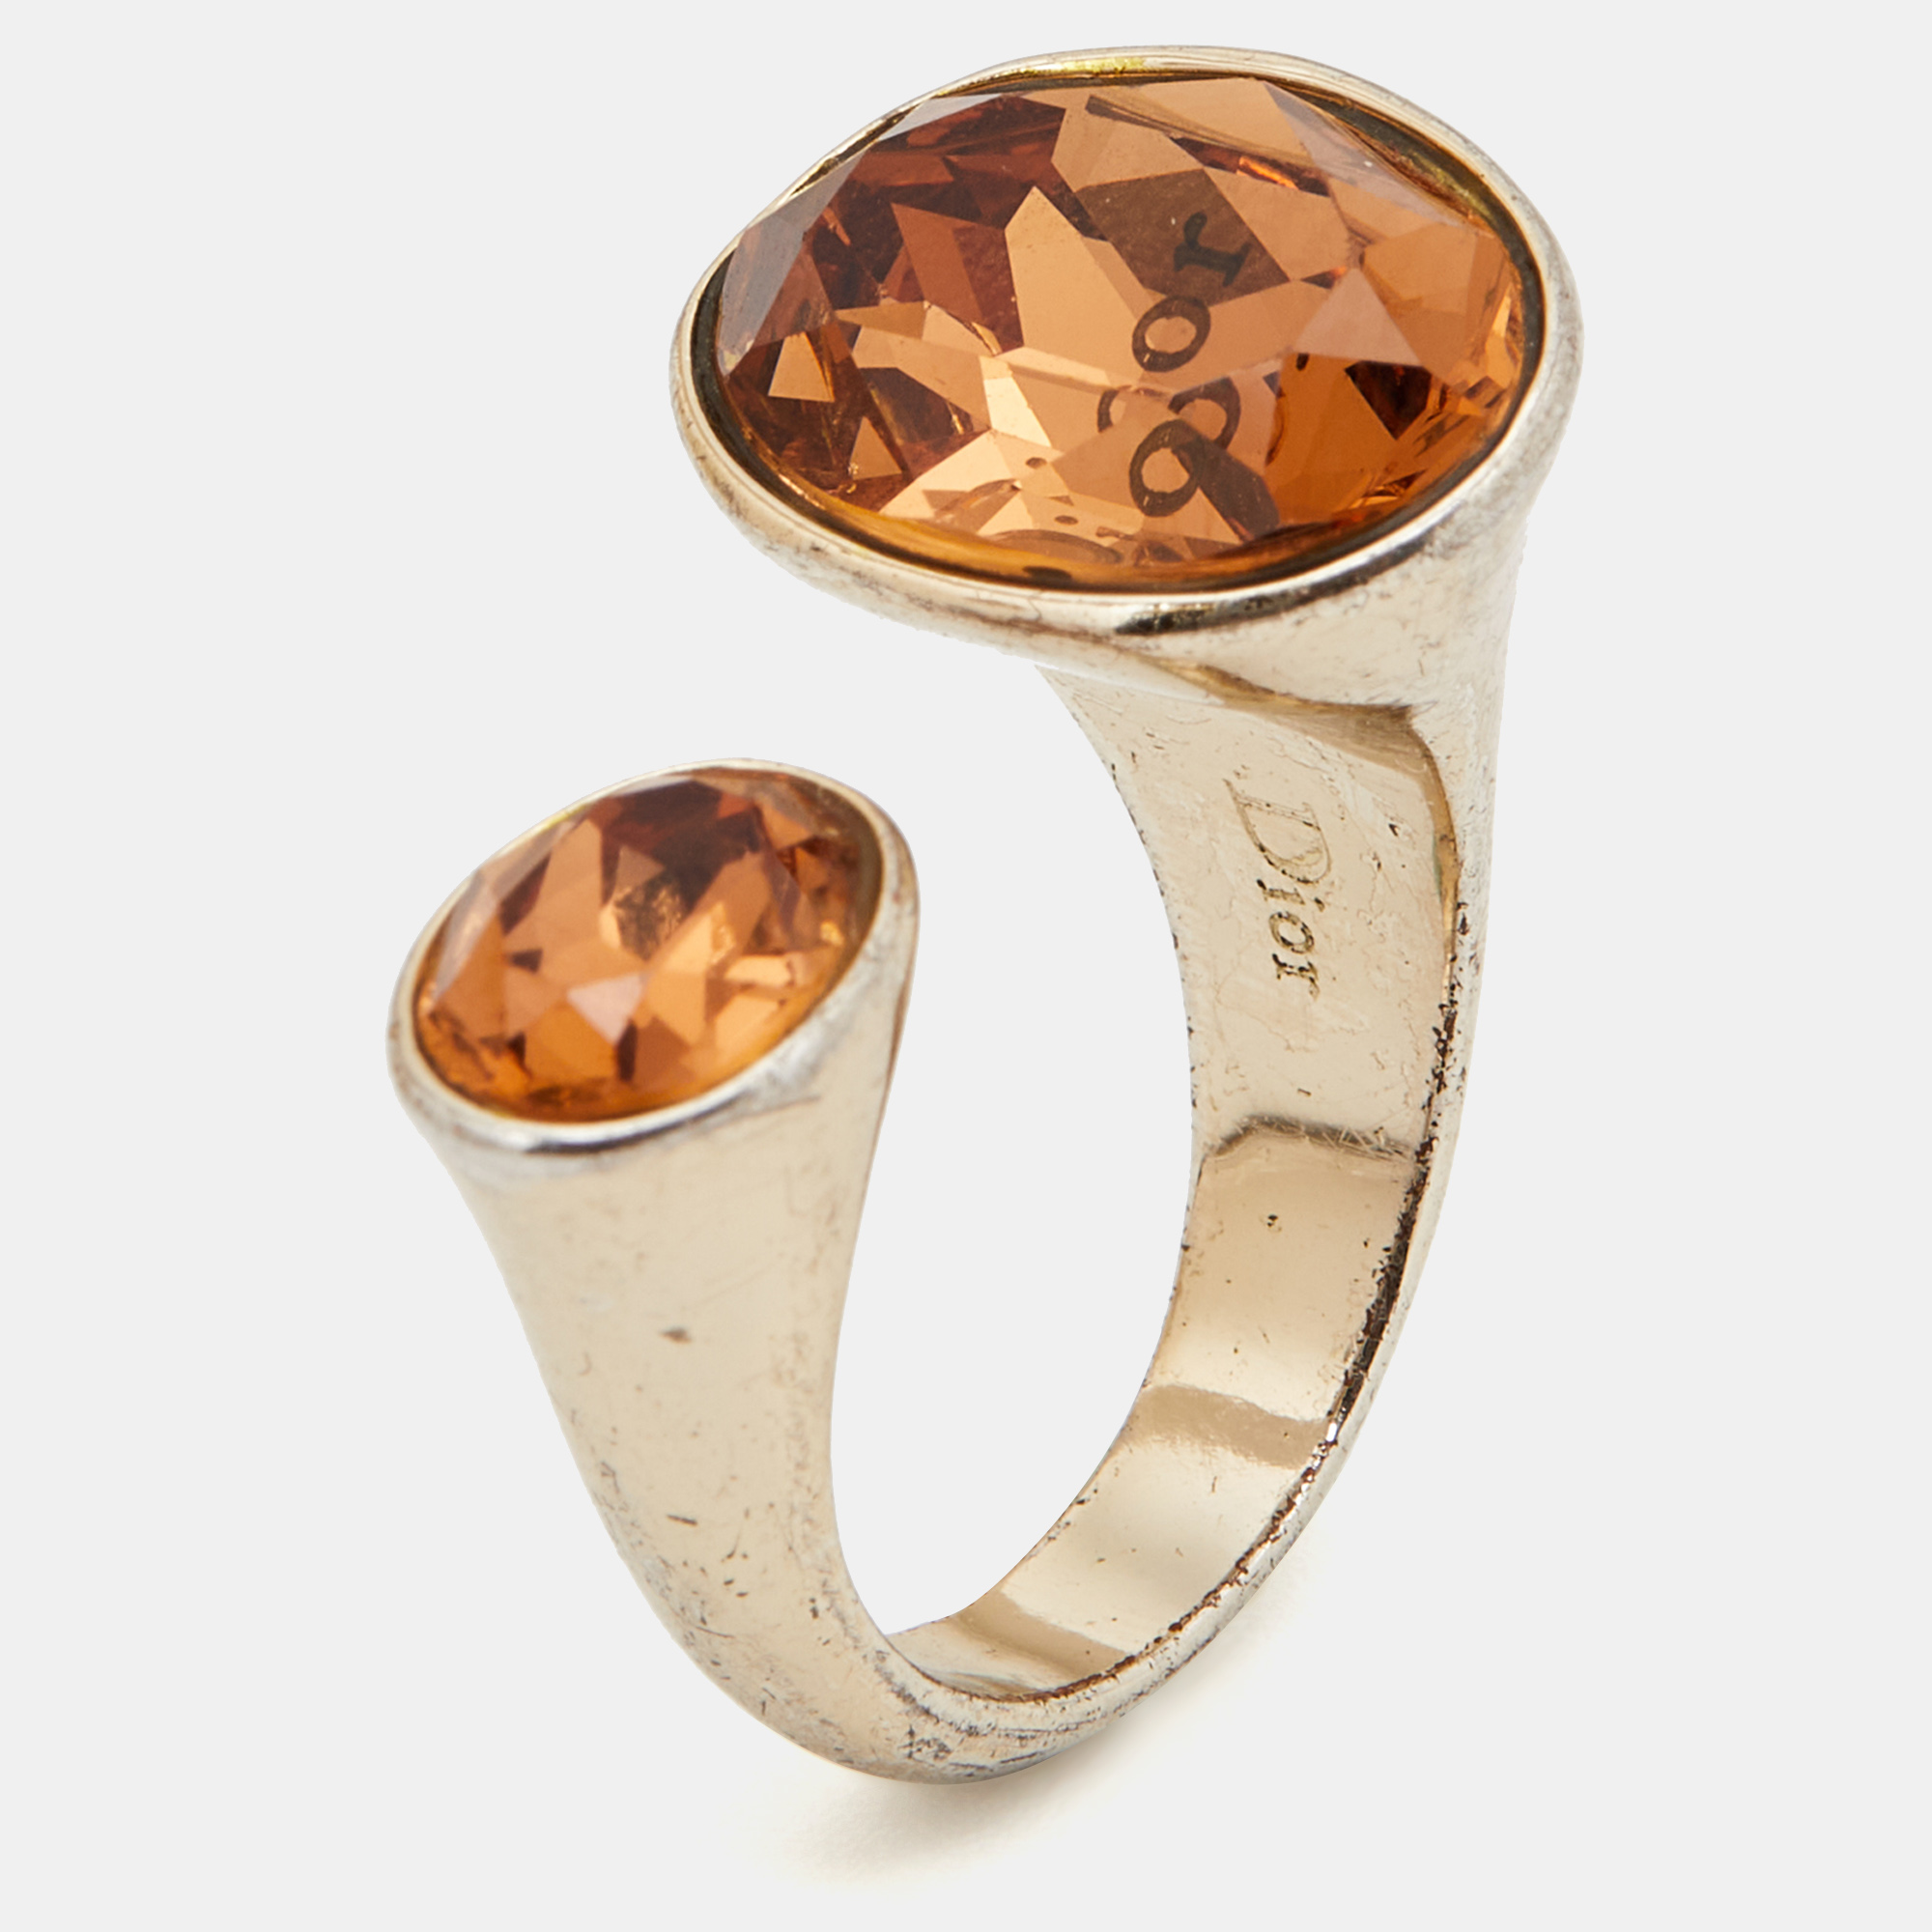 To adorn your fingers in the most elegant way we bring you this designer ring. It has been carved using top quality materials and will elevate your look instantly.